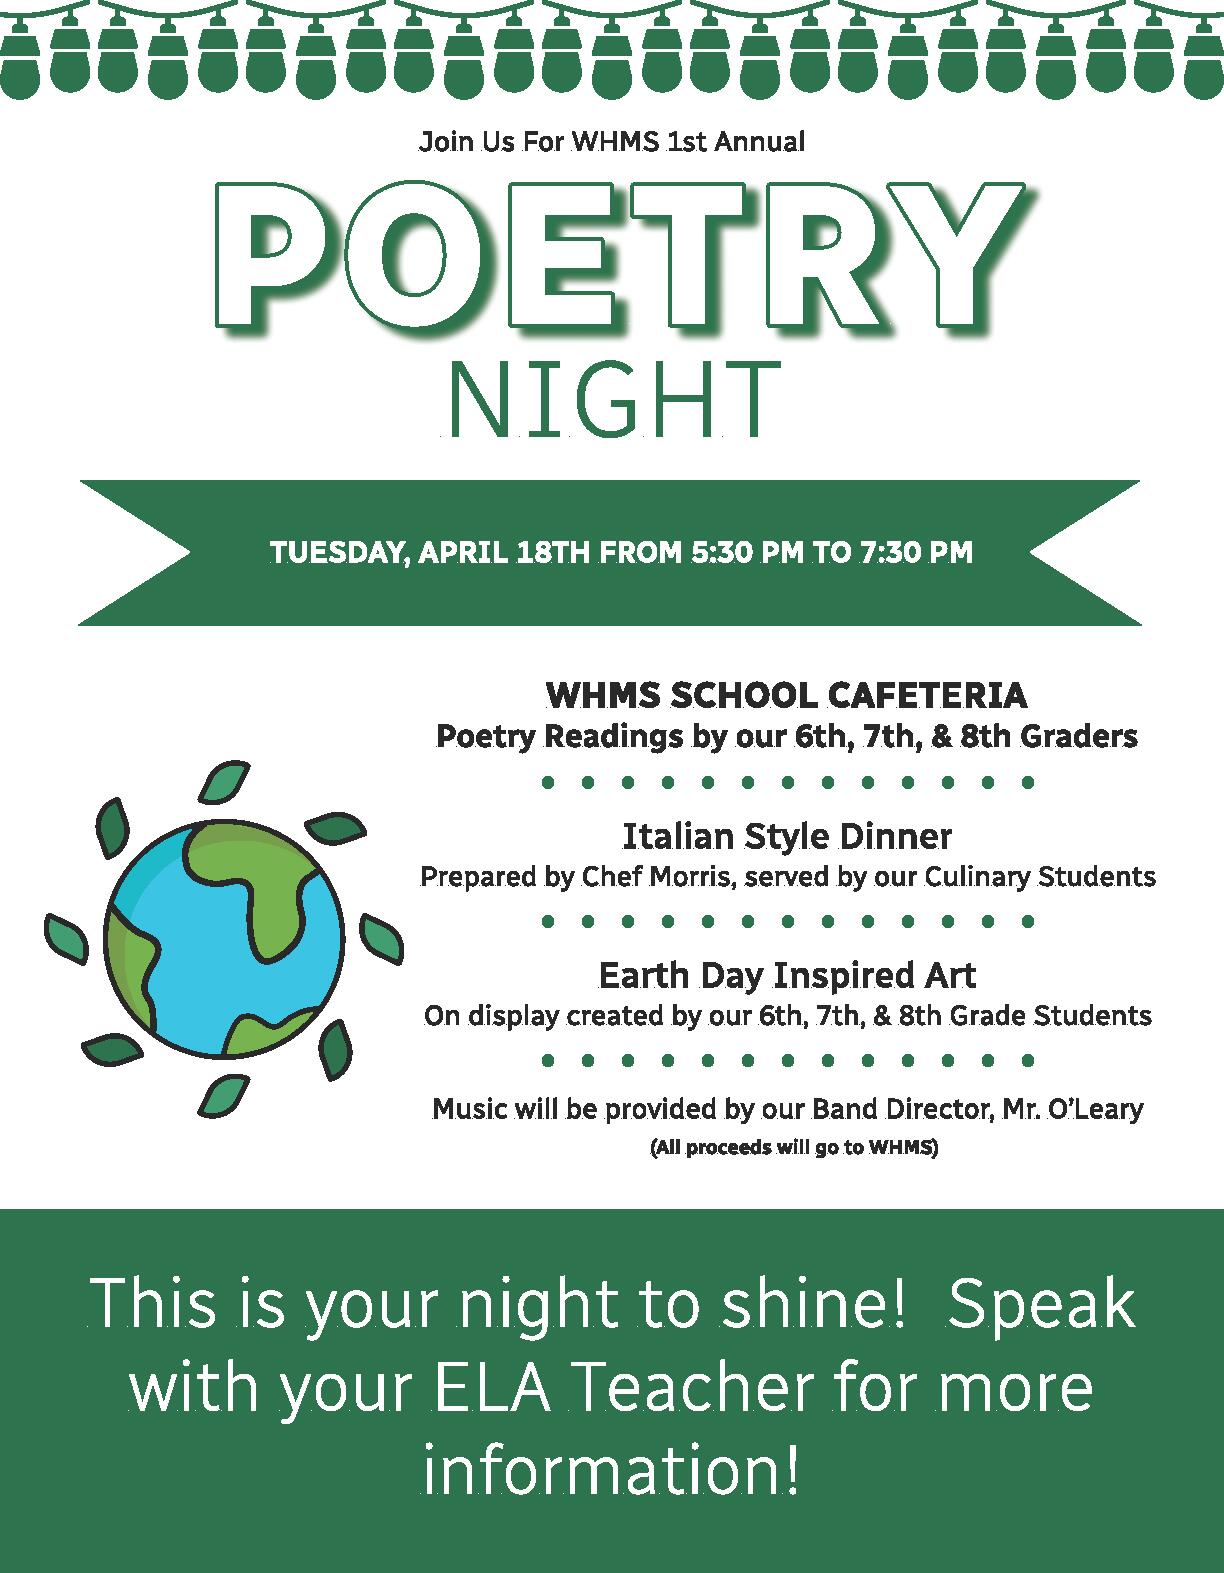 WHMS 1st Annual Poetry Night Flyer